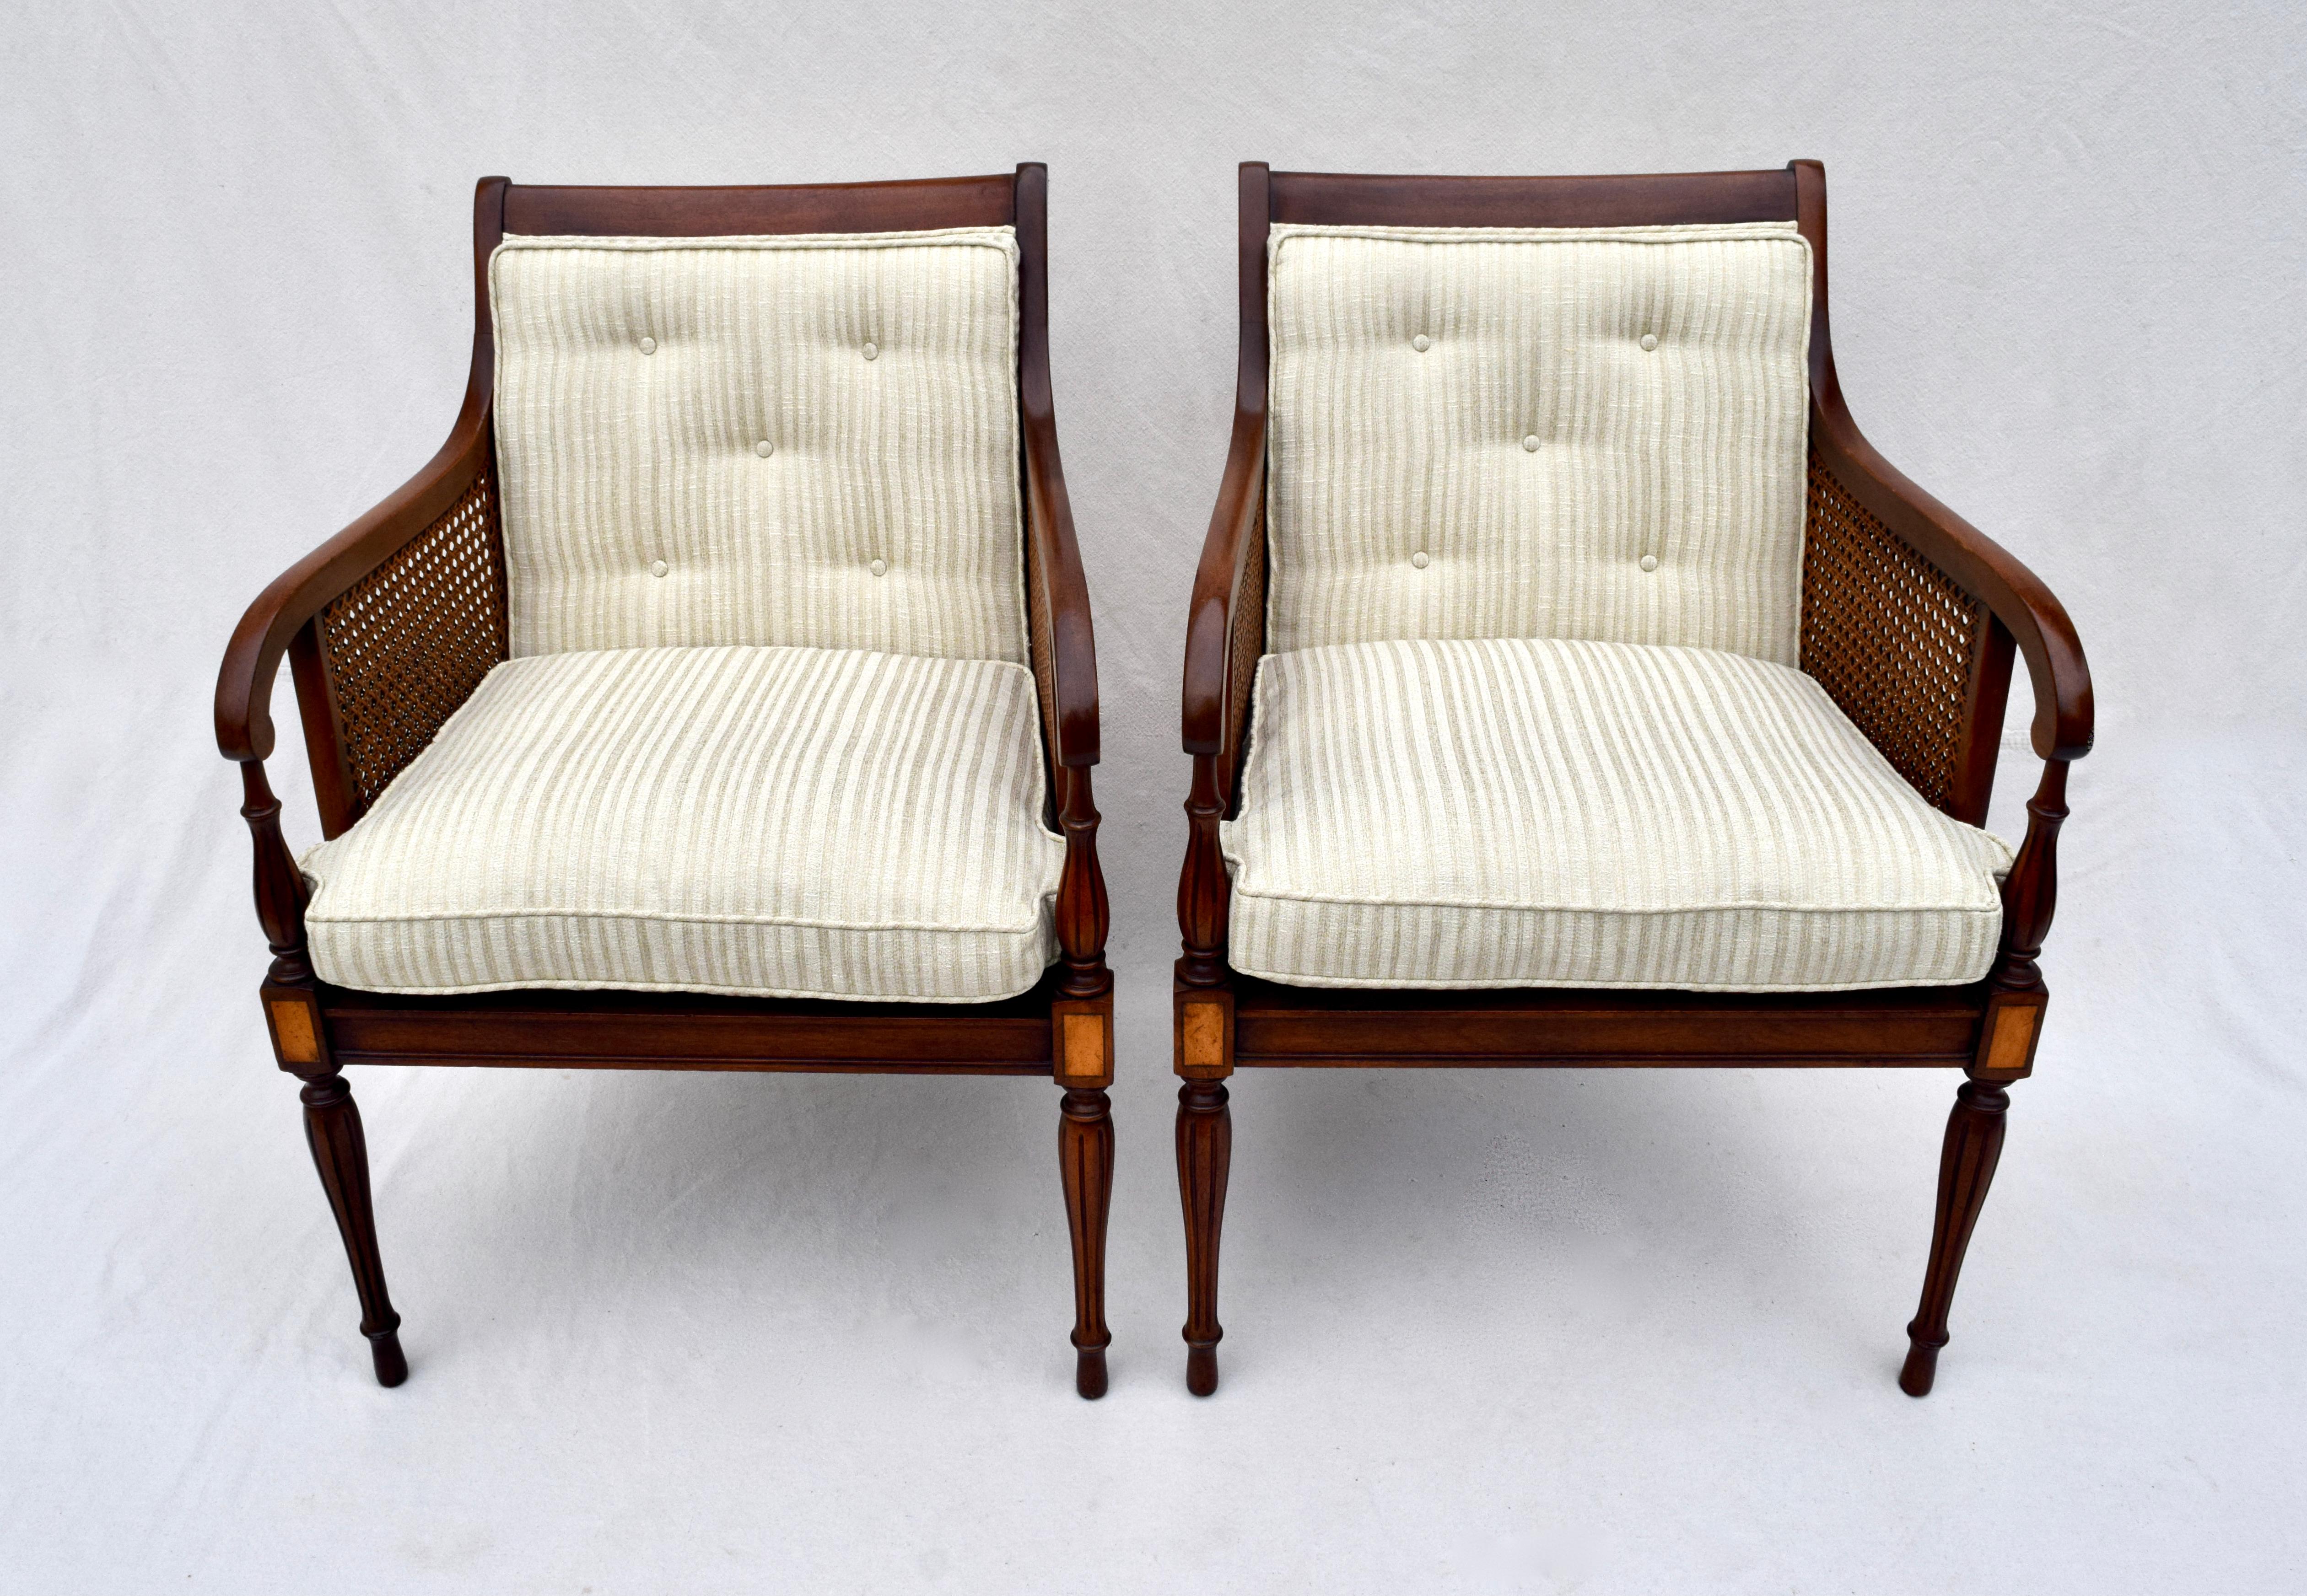 American Hickory Chair Regency Style Double Caned Chairs